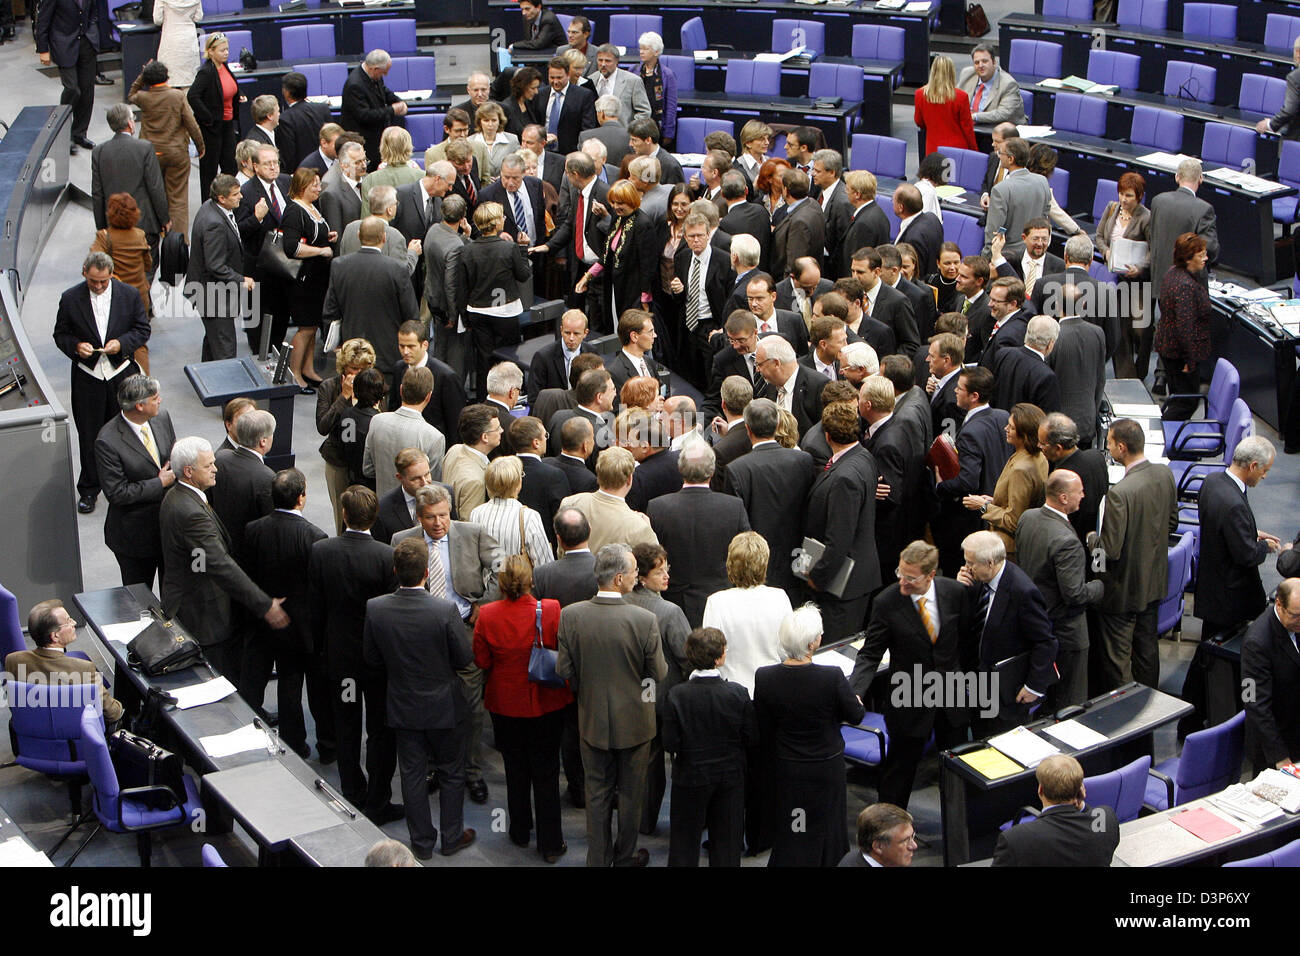 The German parliamentarians are pictured during the voting about the planned German military deployment in Lebanon at the German Bundestag in Berlin, Germany, Wednesday, 20 September 2006. Germany's parliament agreed Wednesday to contribute warships to a UN force for Lebanon in the first military deployment by Germany in the Middle East since World War II. The mission will see a na Stock Photo